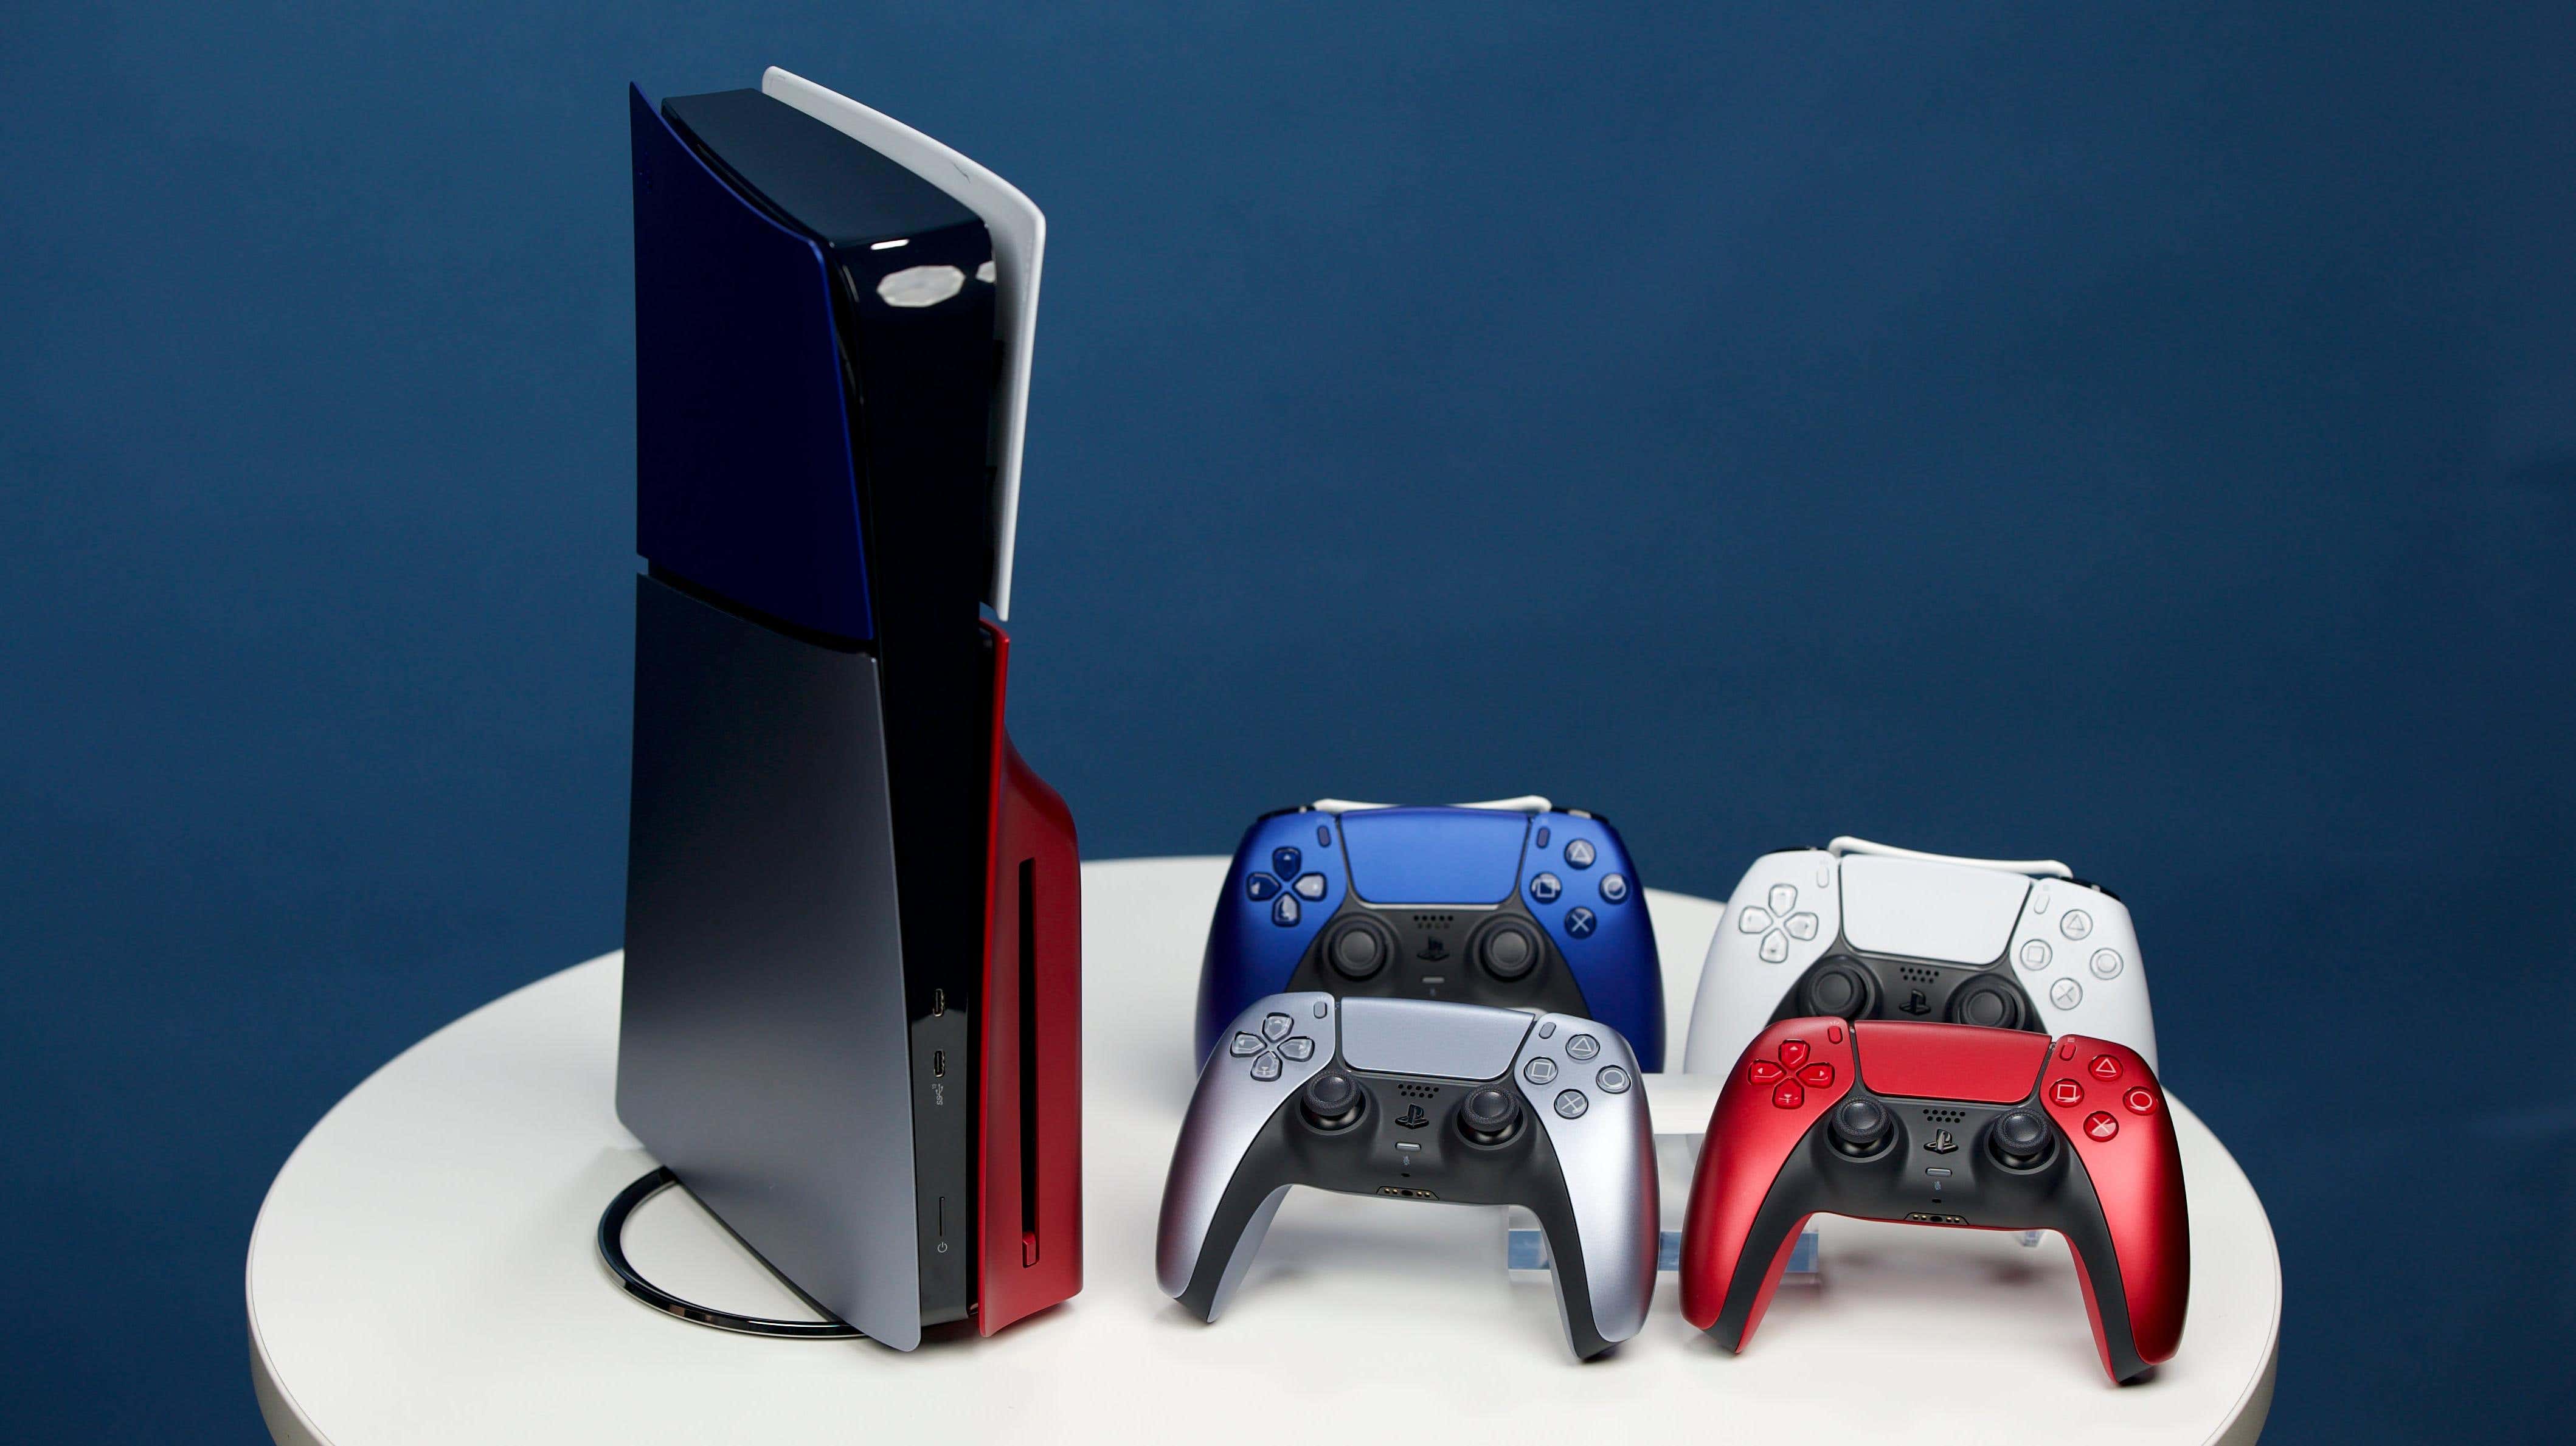 The PlayStation 5 comes in white, red, silver, and blue.